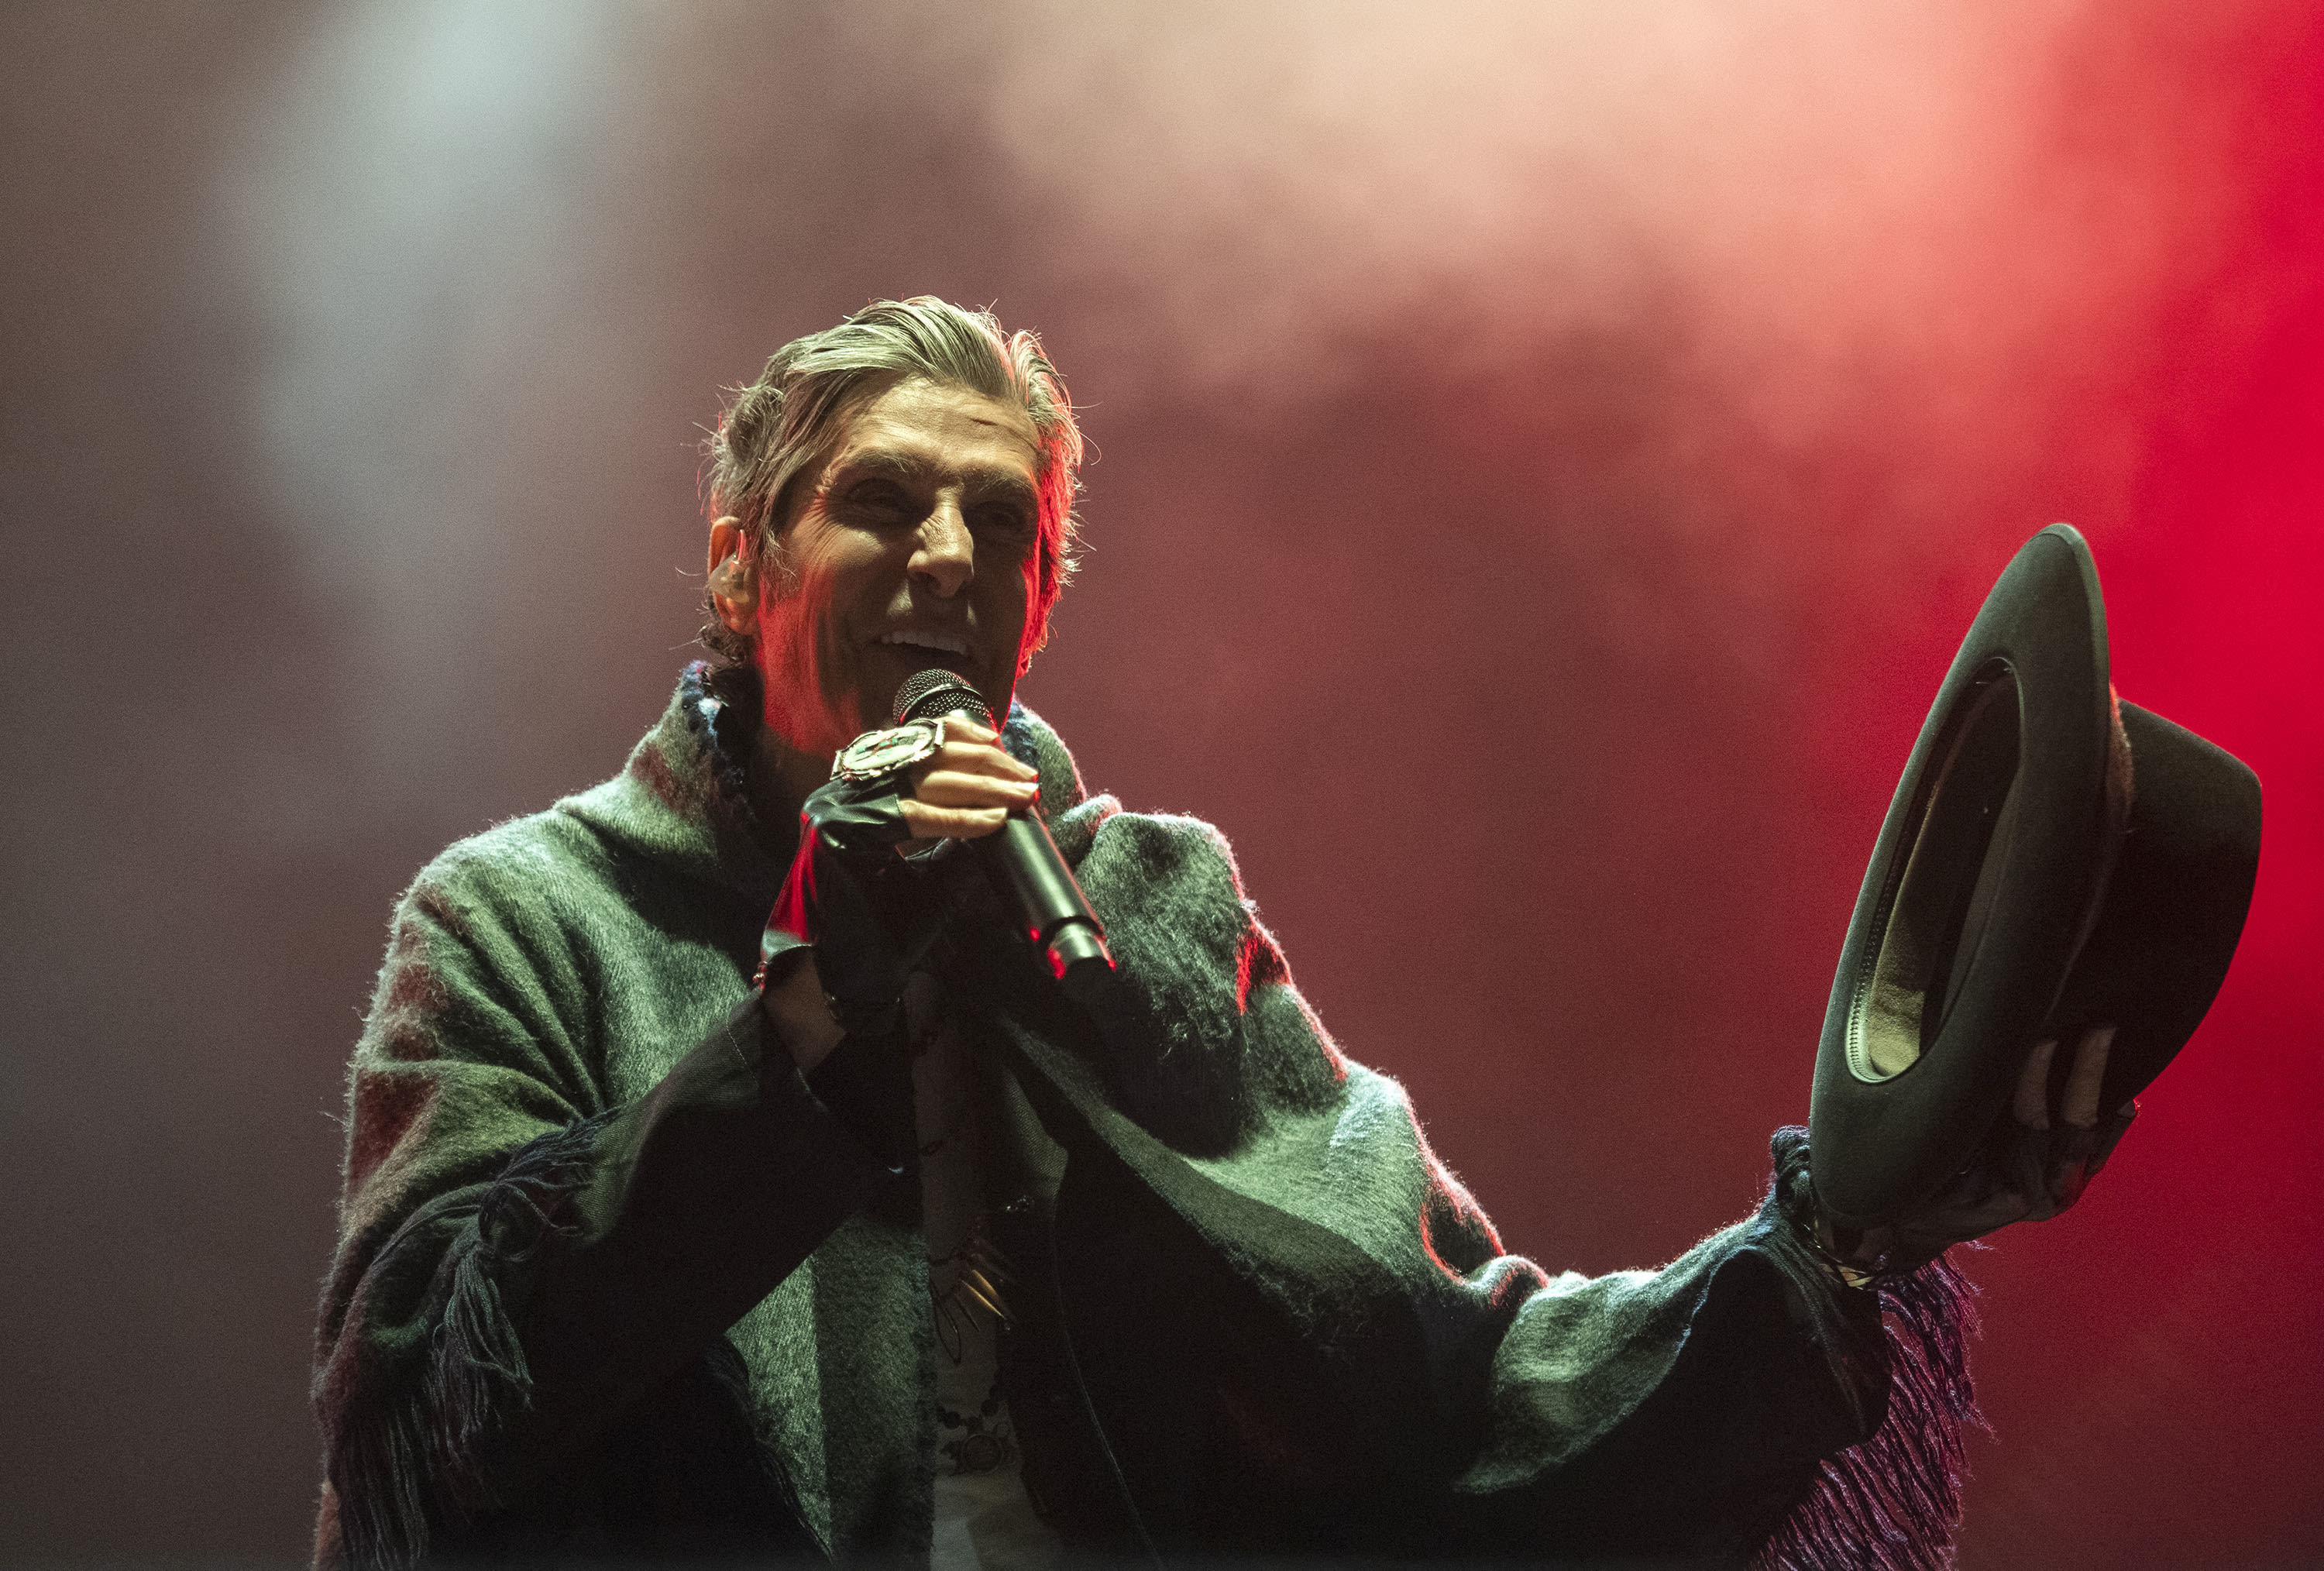 Jane’s Addiction core members release first new song together since 1990